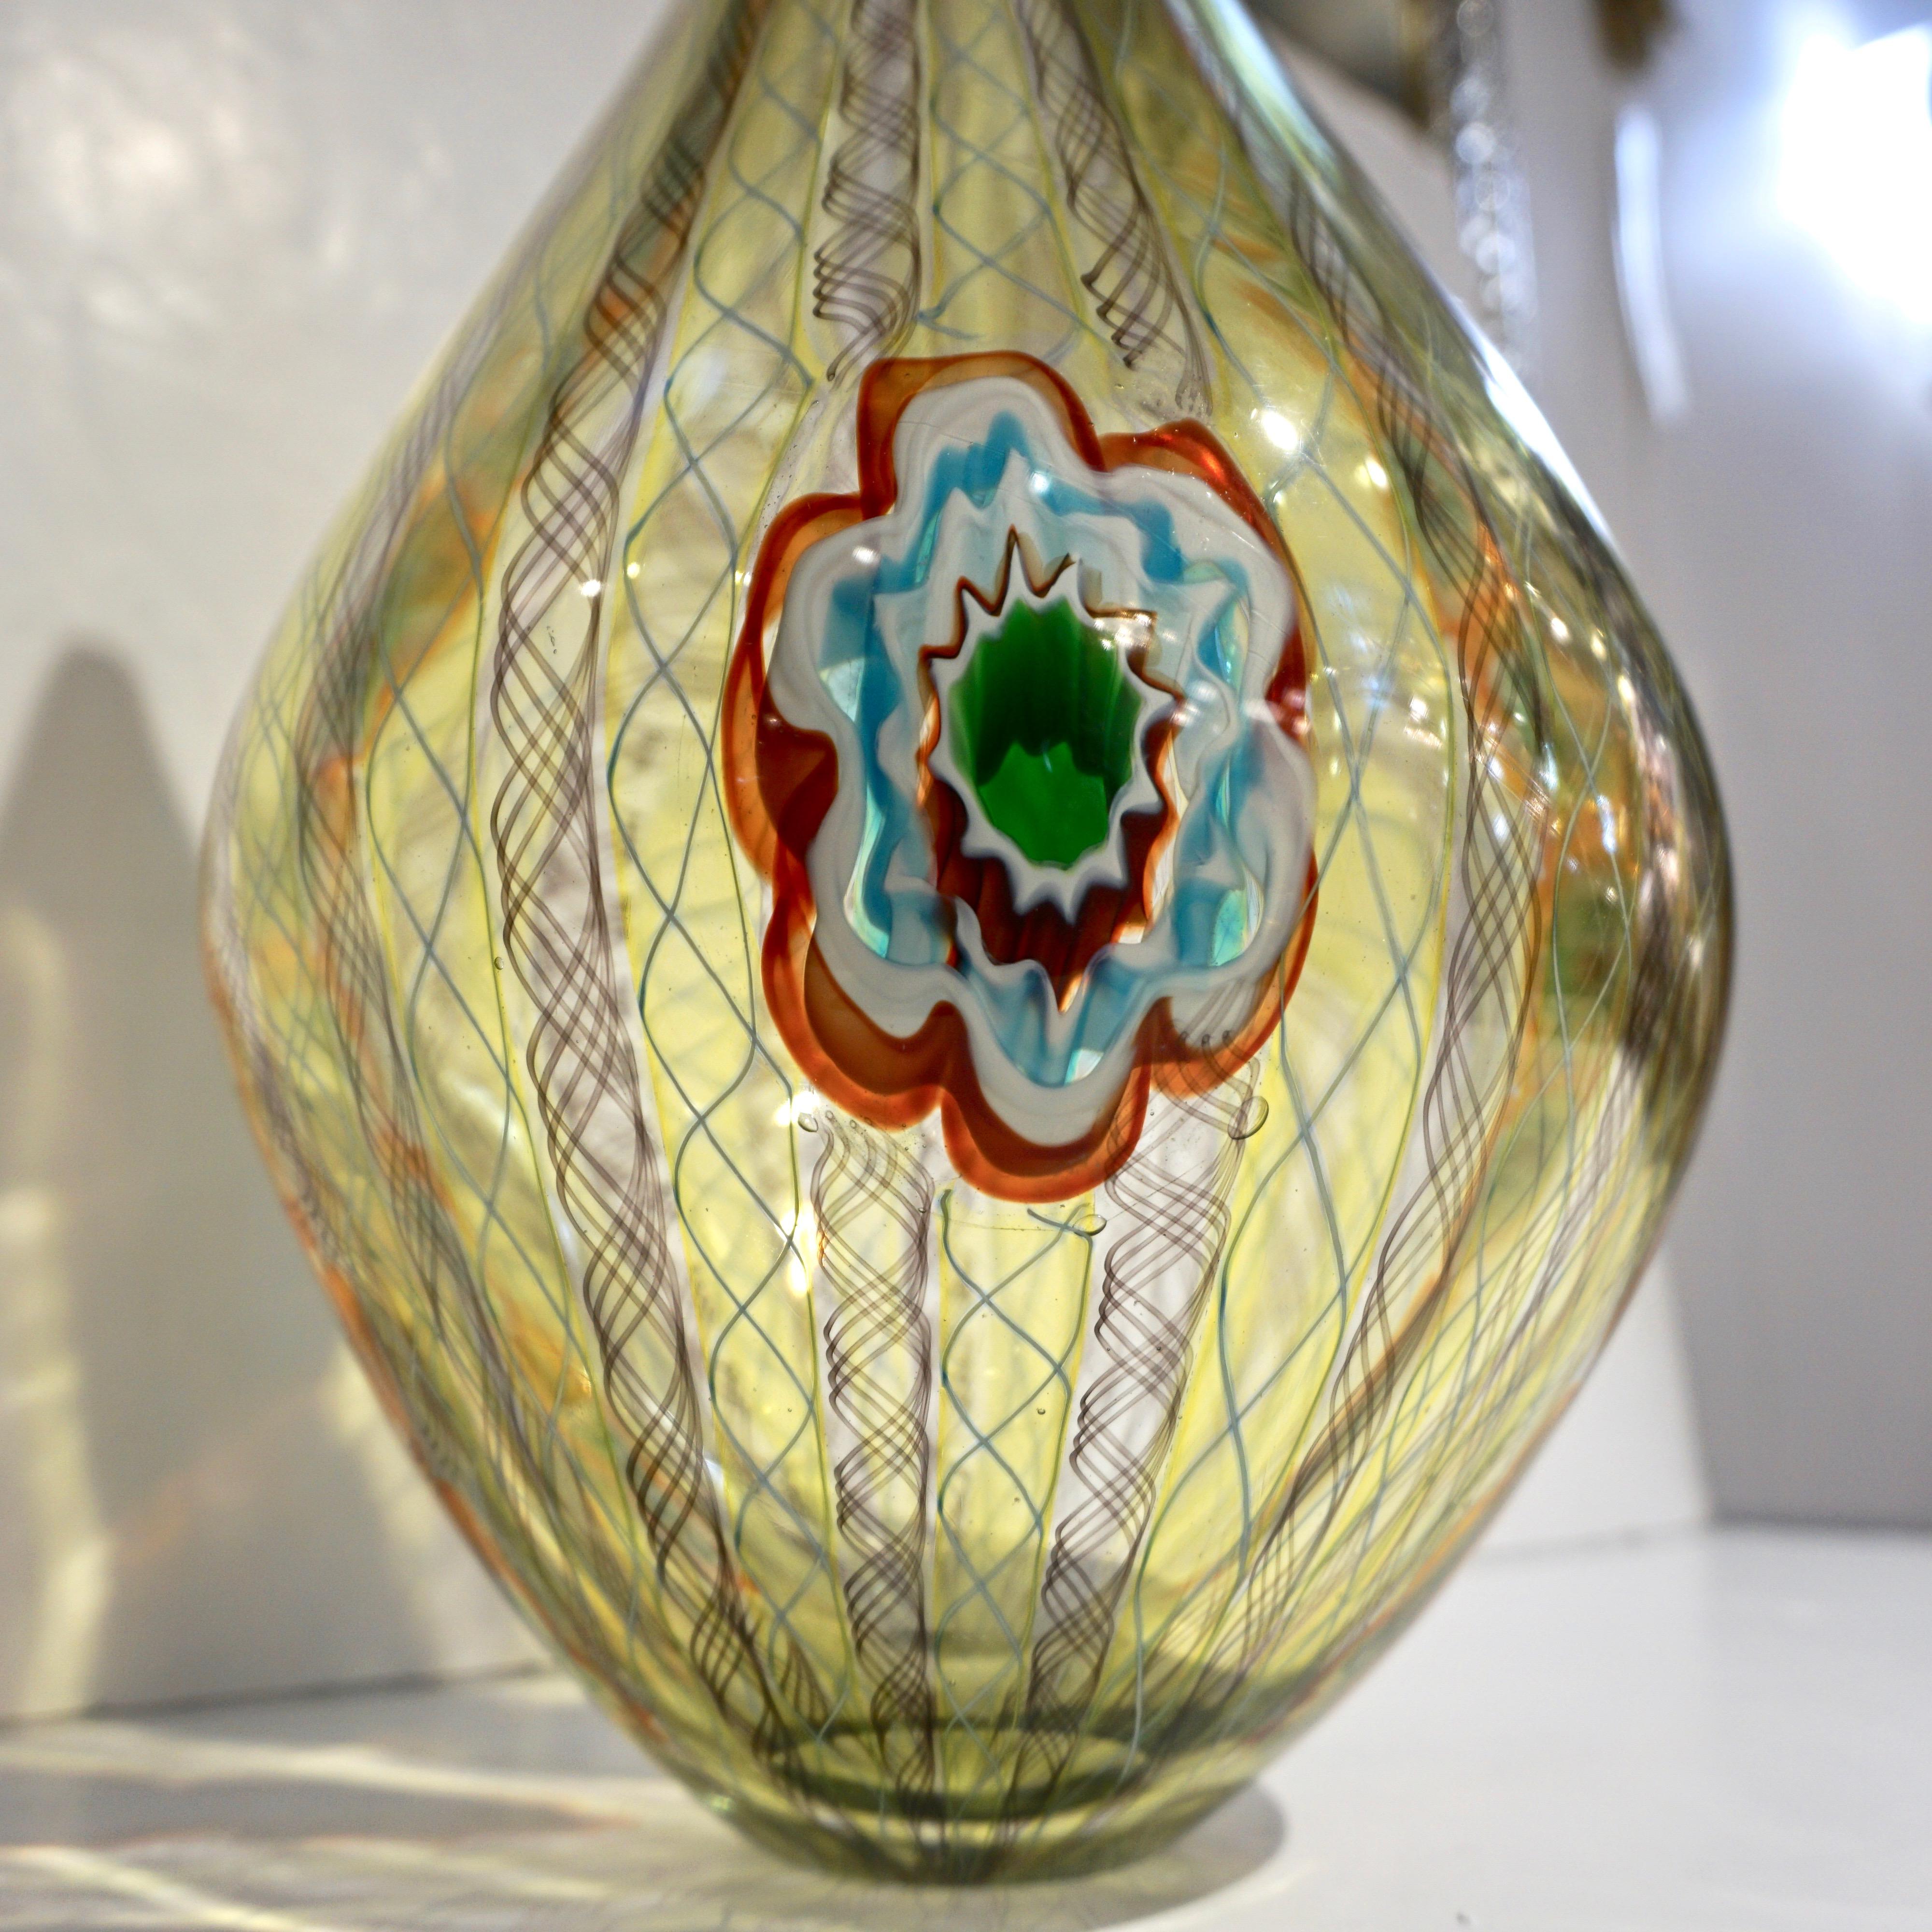 Early 21st century, circa 2015, one-of-a-kind blown colorful Murano glass single flower vase, modern Work of Art signed by Tagliapietra Fabio, this sophisticated colorful glass sculpture for a single flower, with the body in an unusual chartreuse